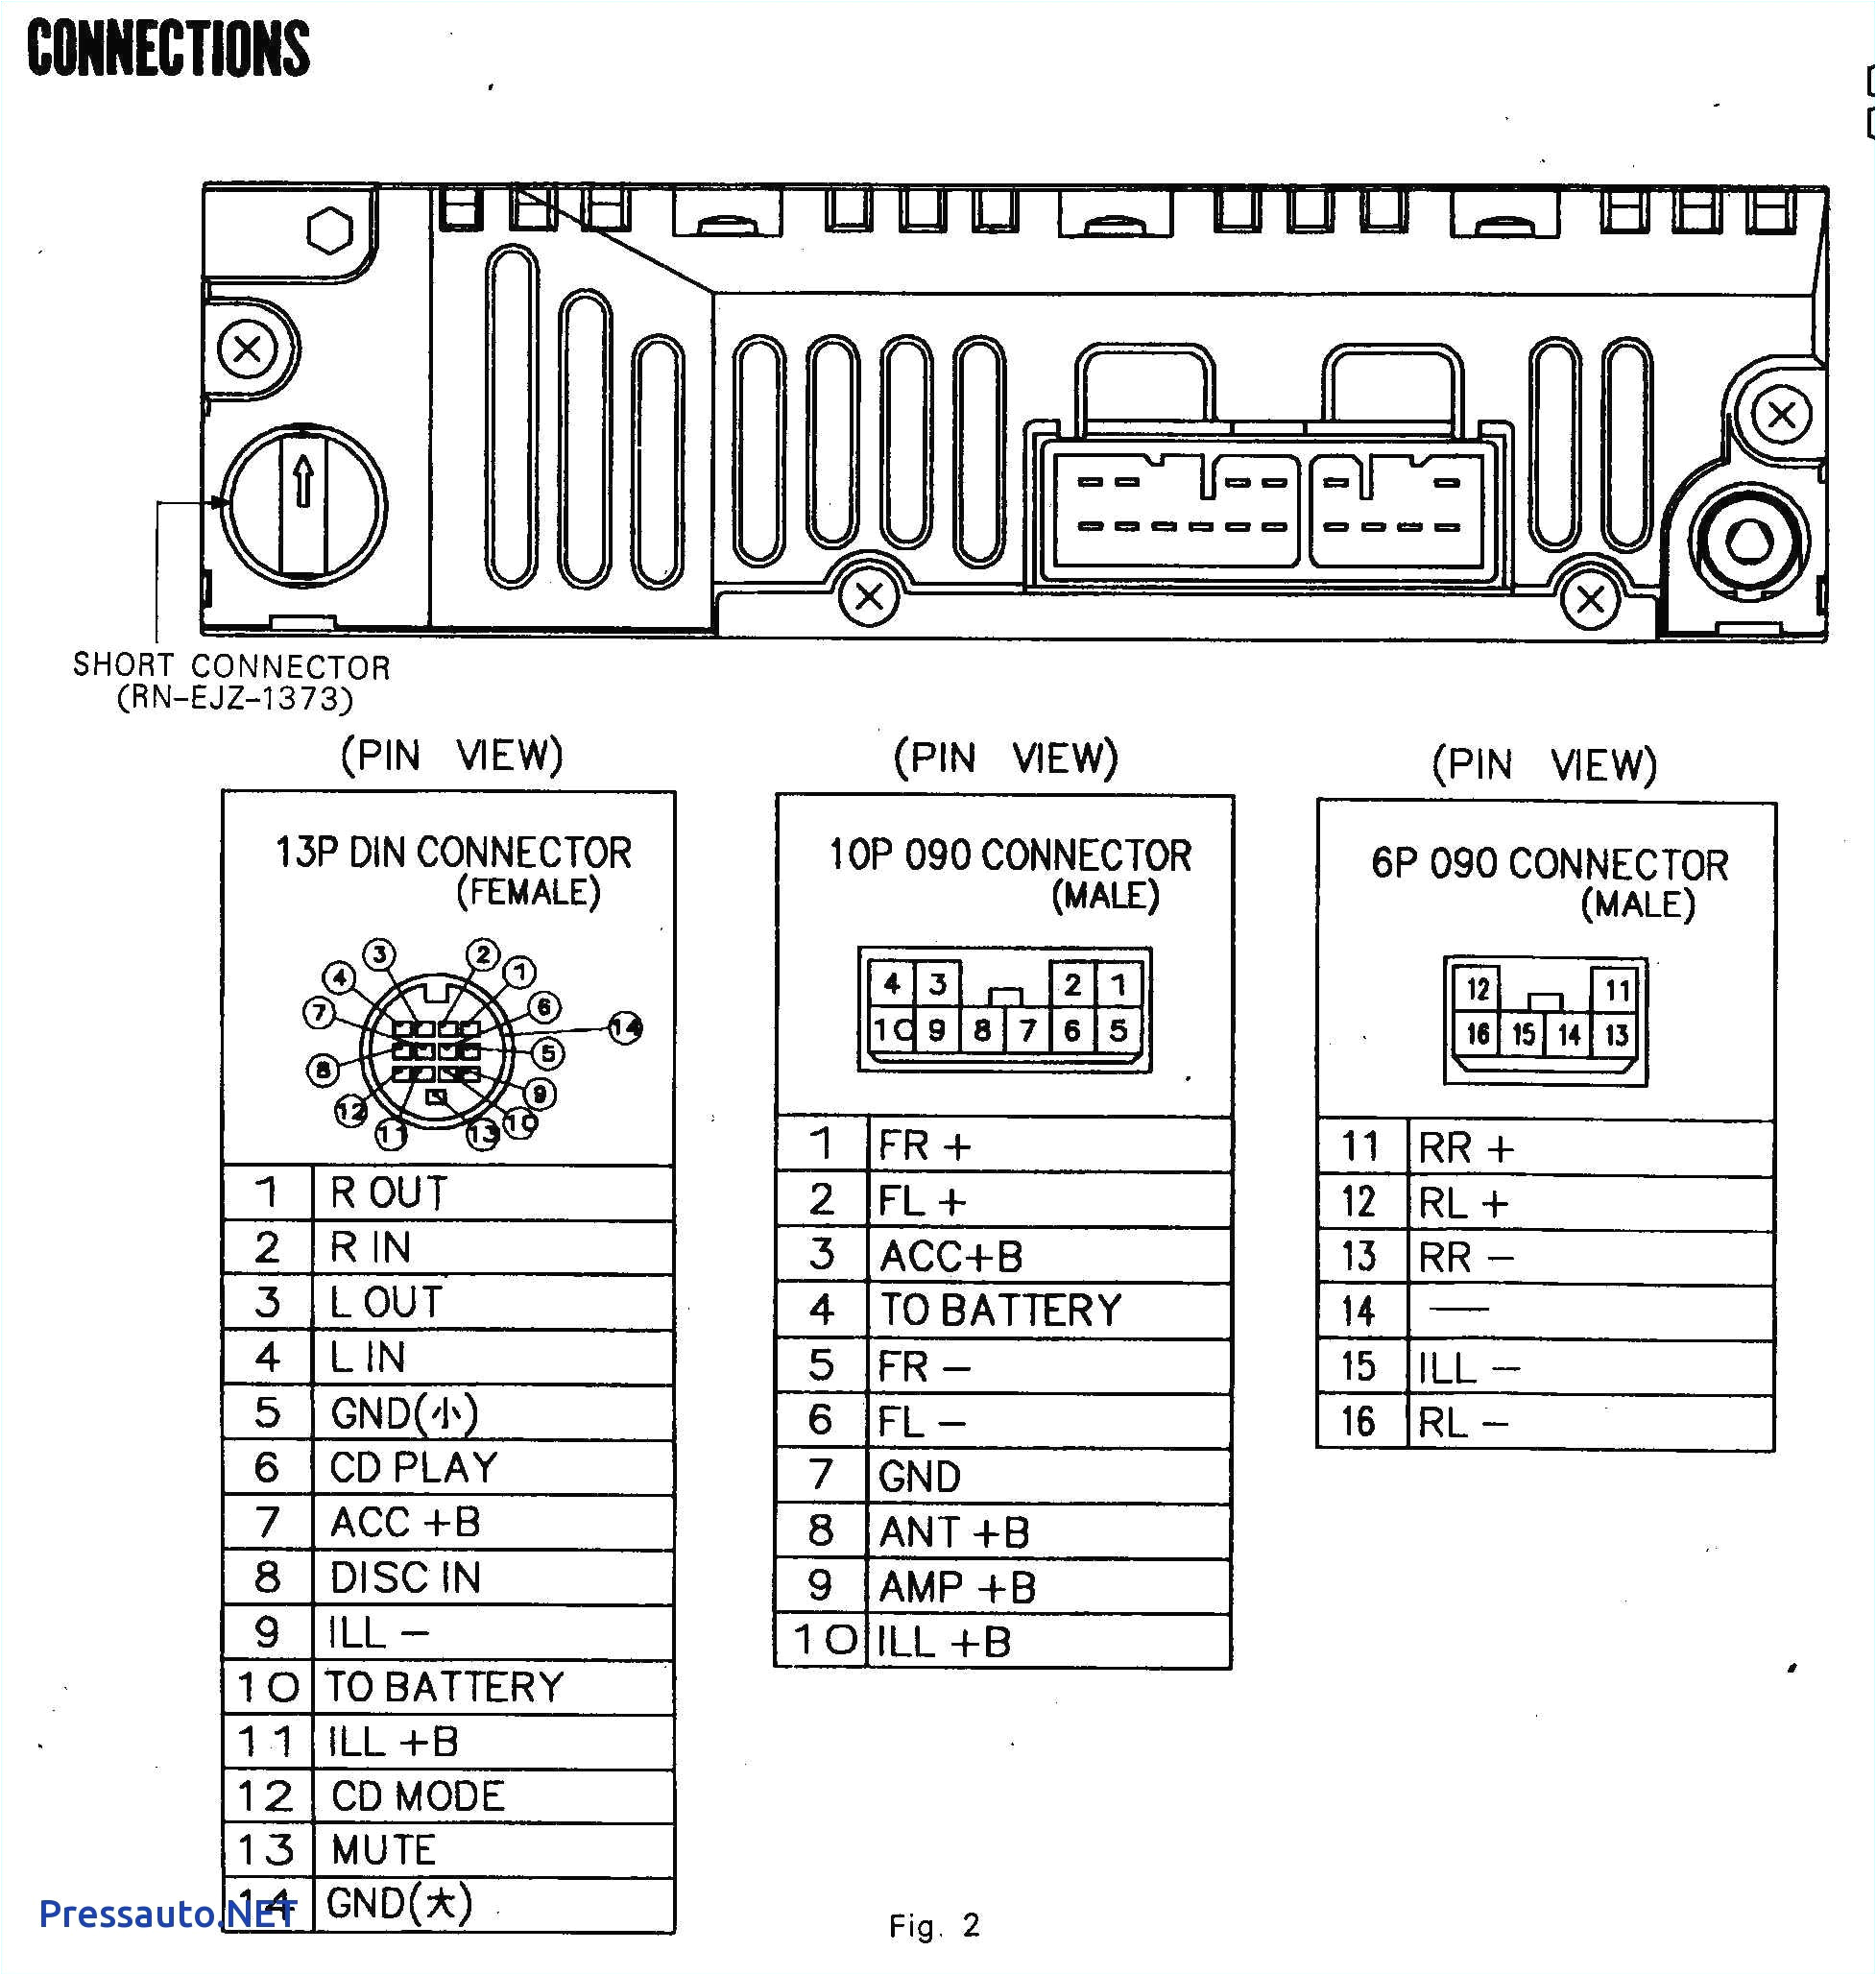 1995 nissan wiring harness wiring diagram page 1995 nissan altima radio wiring wiring diagrams show 1995